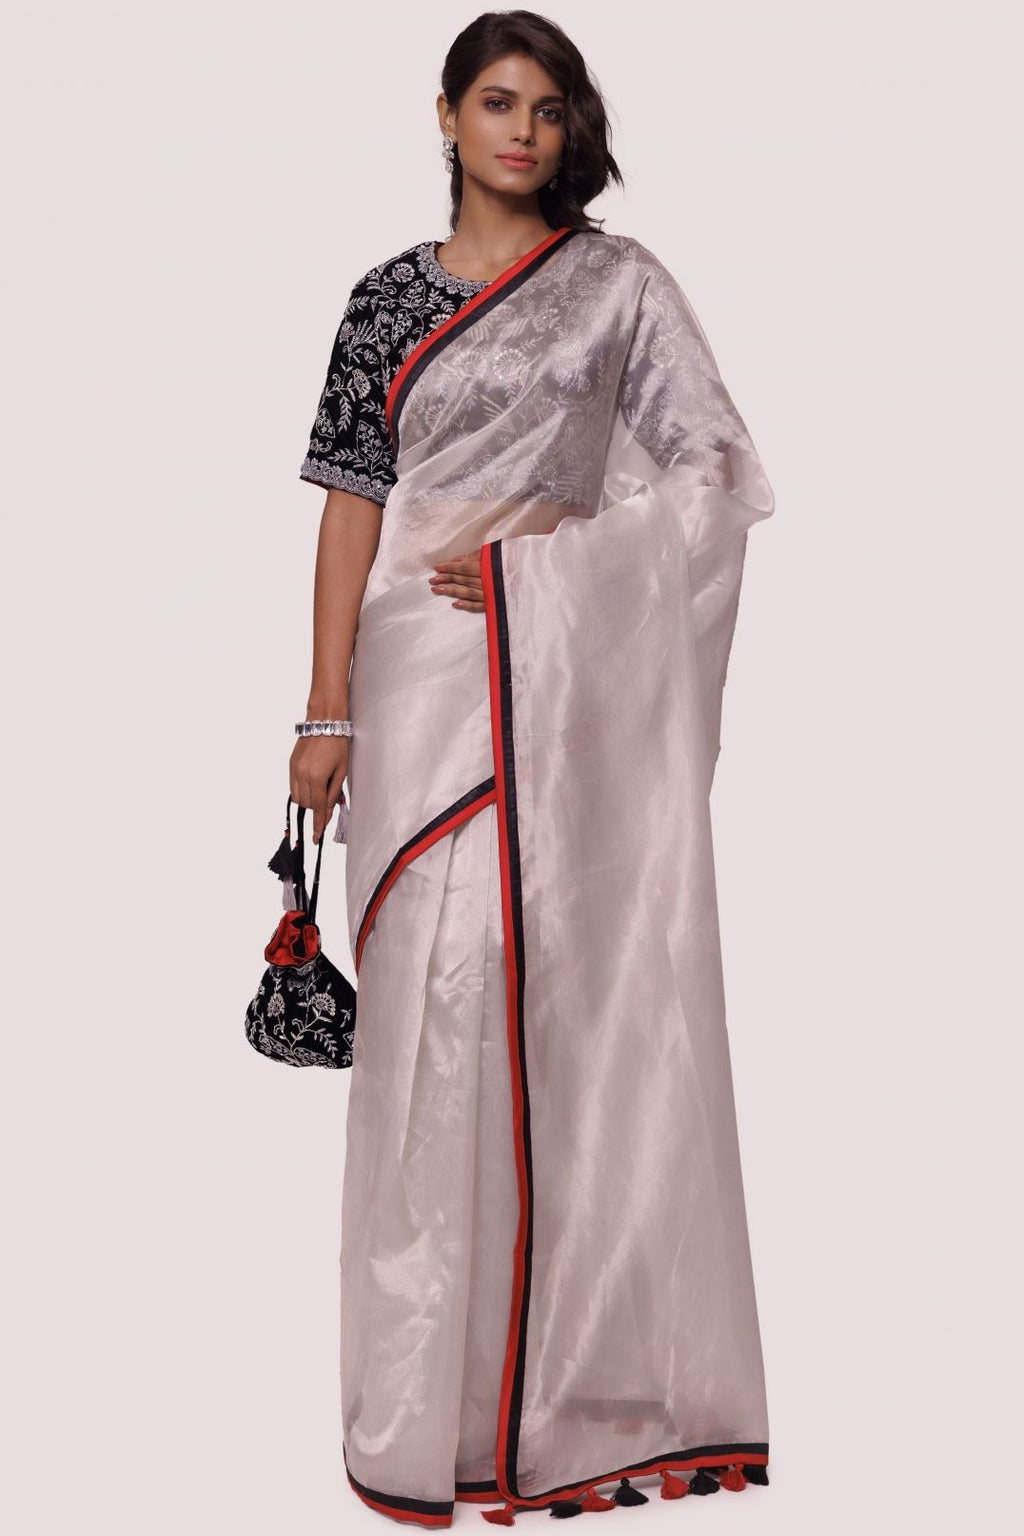 Buy silver tissue saree online in USA with black embroidered saree blouse. Look your best at parties and weddings in beautiful designer sarees, embroidered sarees, handwoven sarees, silk sarees, organza saris from Pure Elegance Indian saree store in USA.-full view